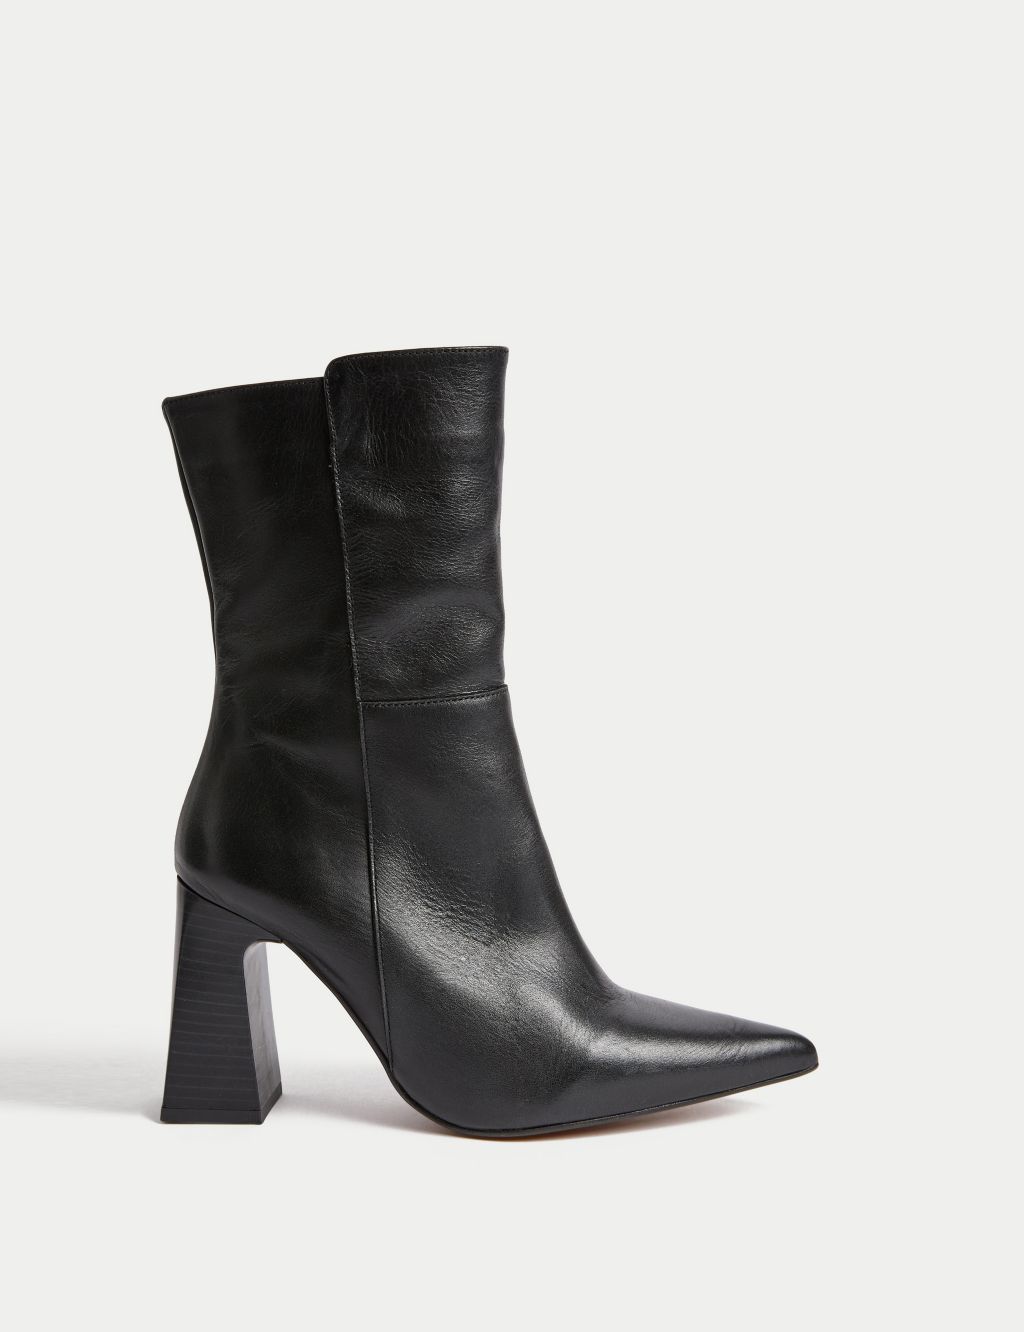 Leather Statement Pointed Ankle Boots image 1